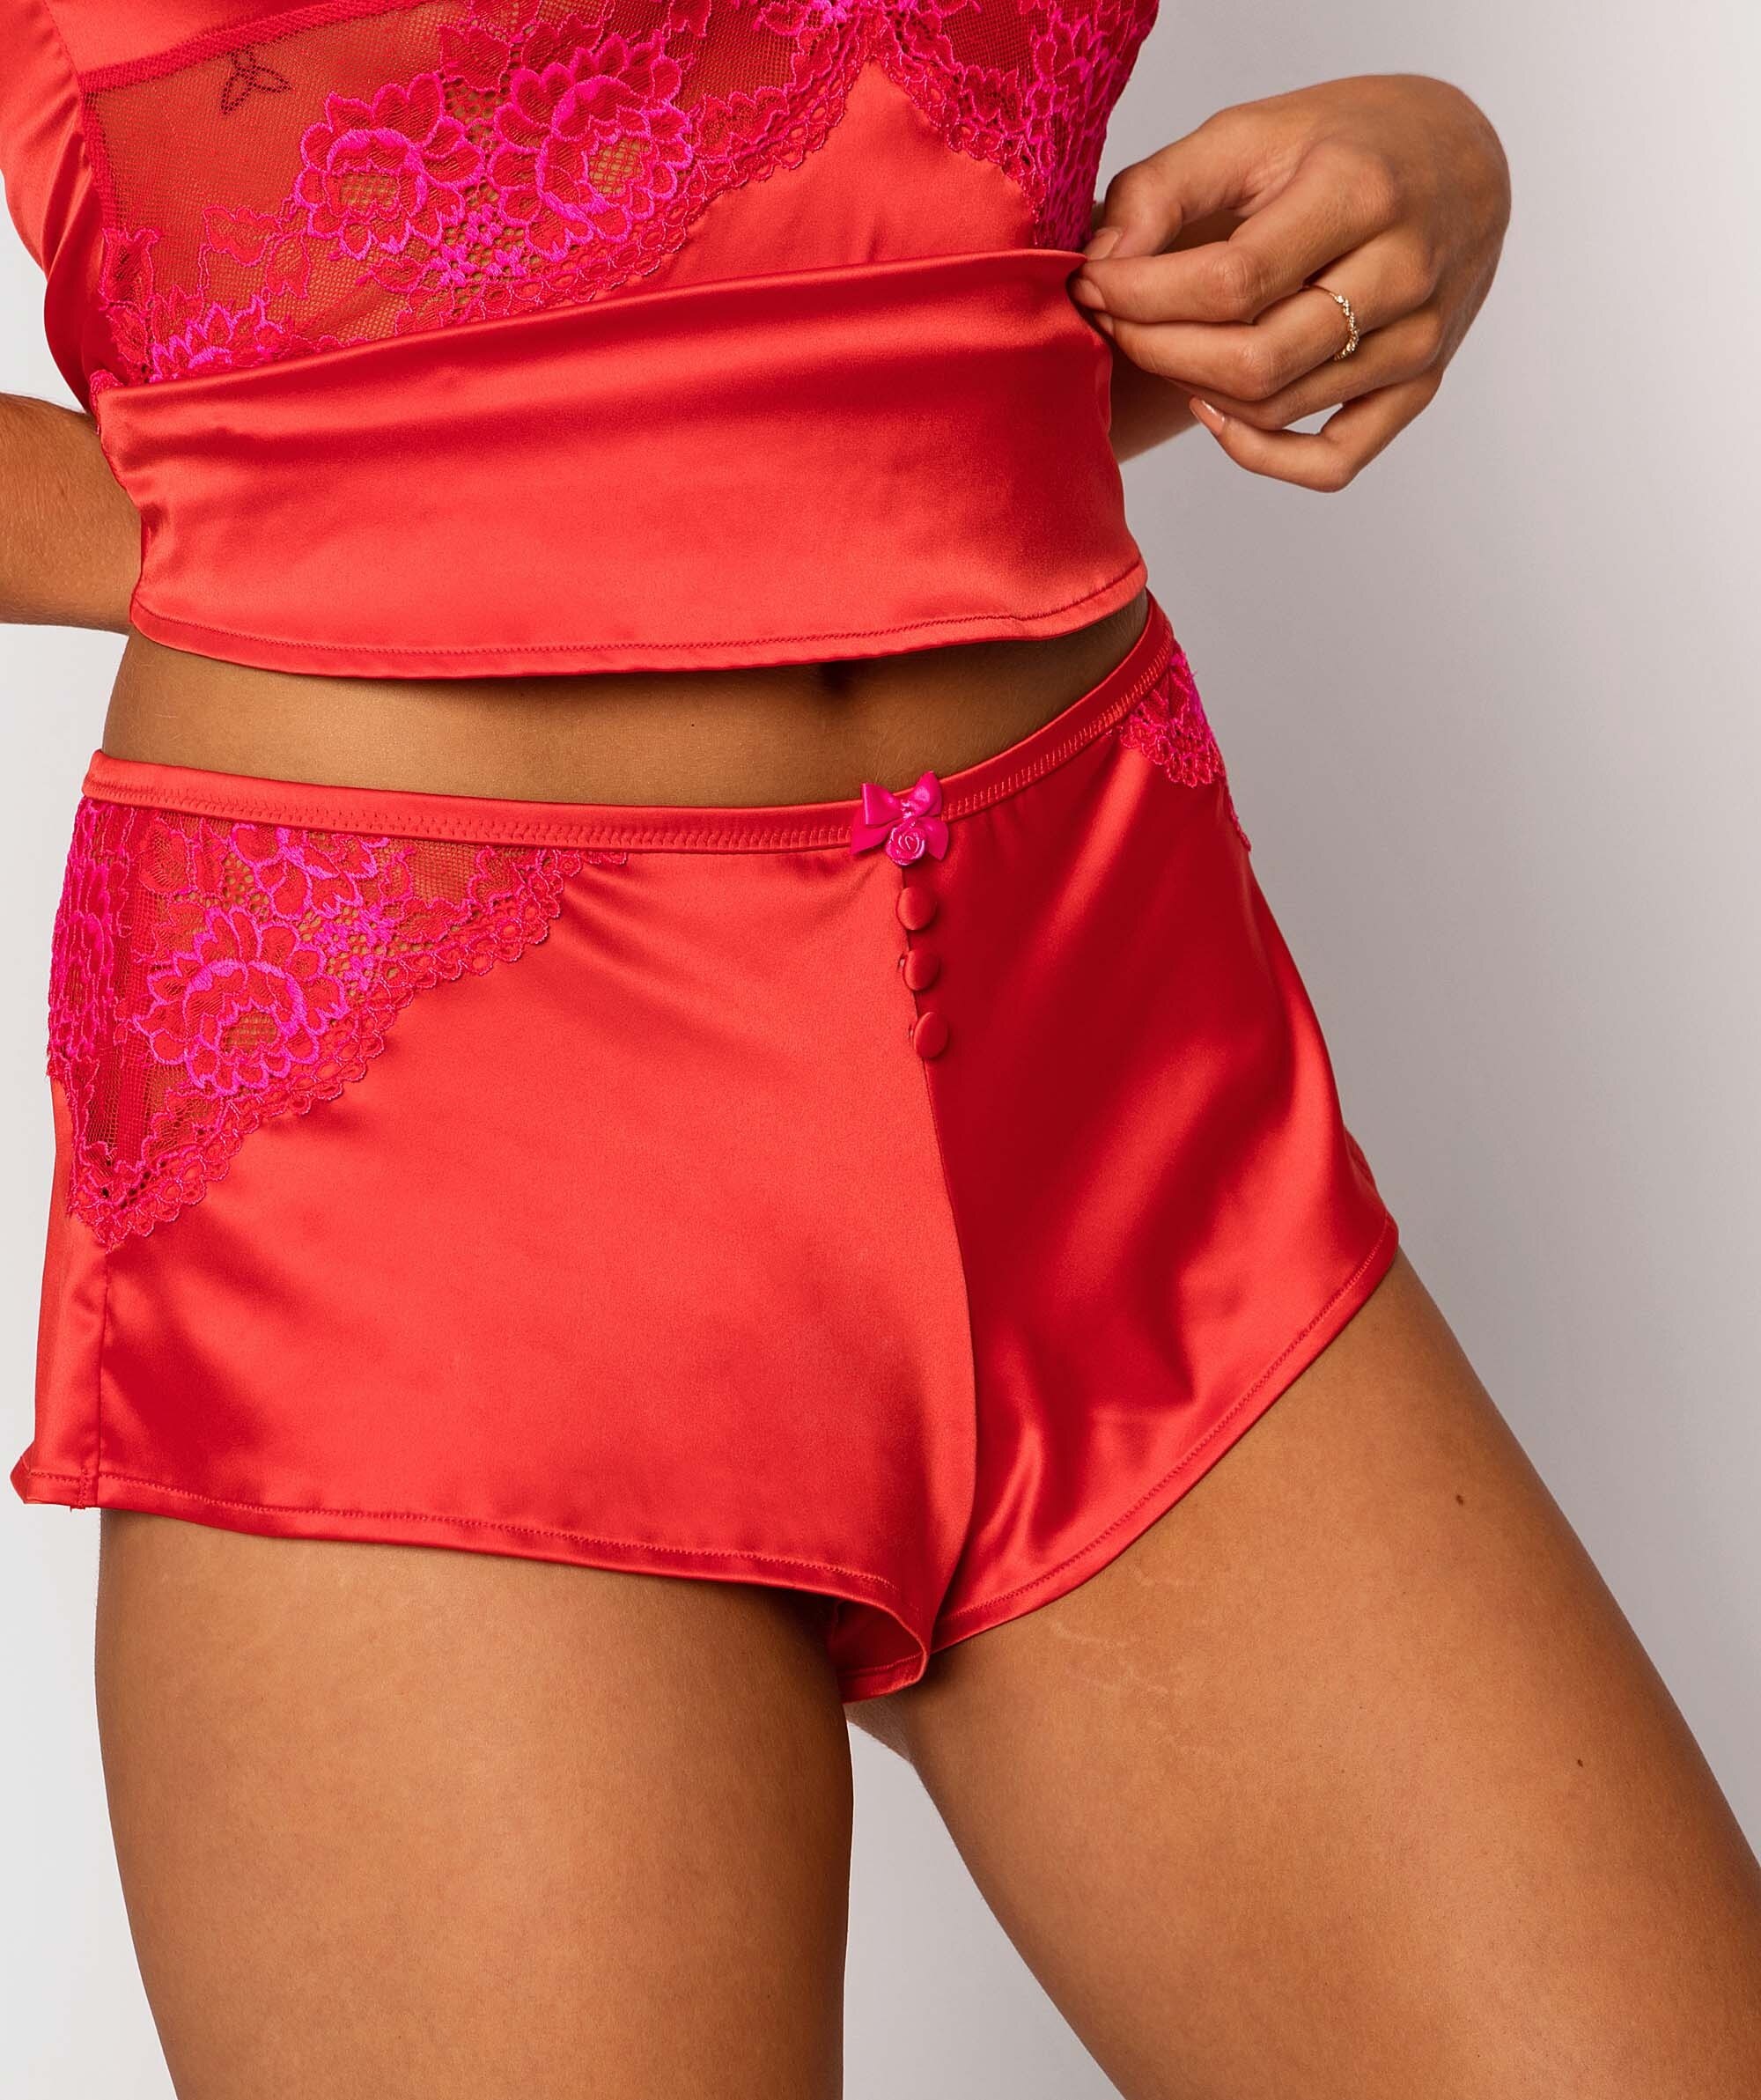 Enchanted Bordeaux French Knicker - Red/Pink 